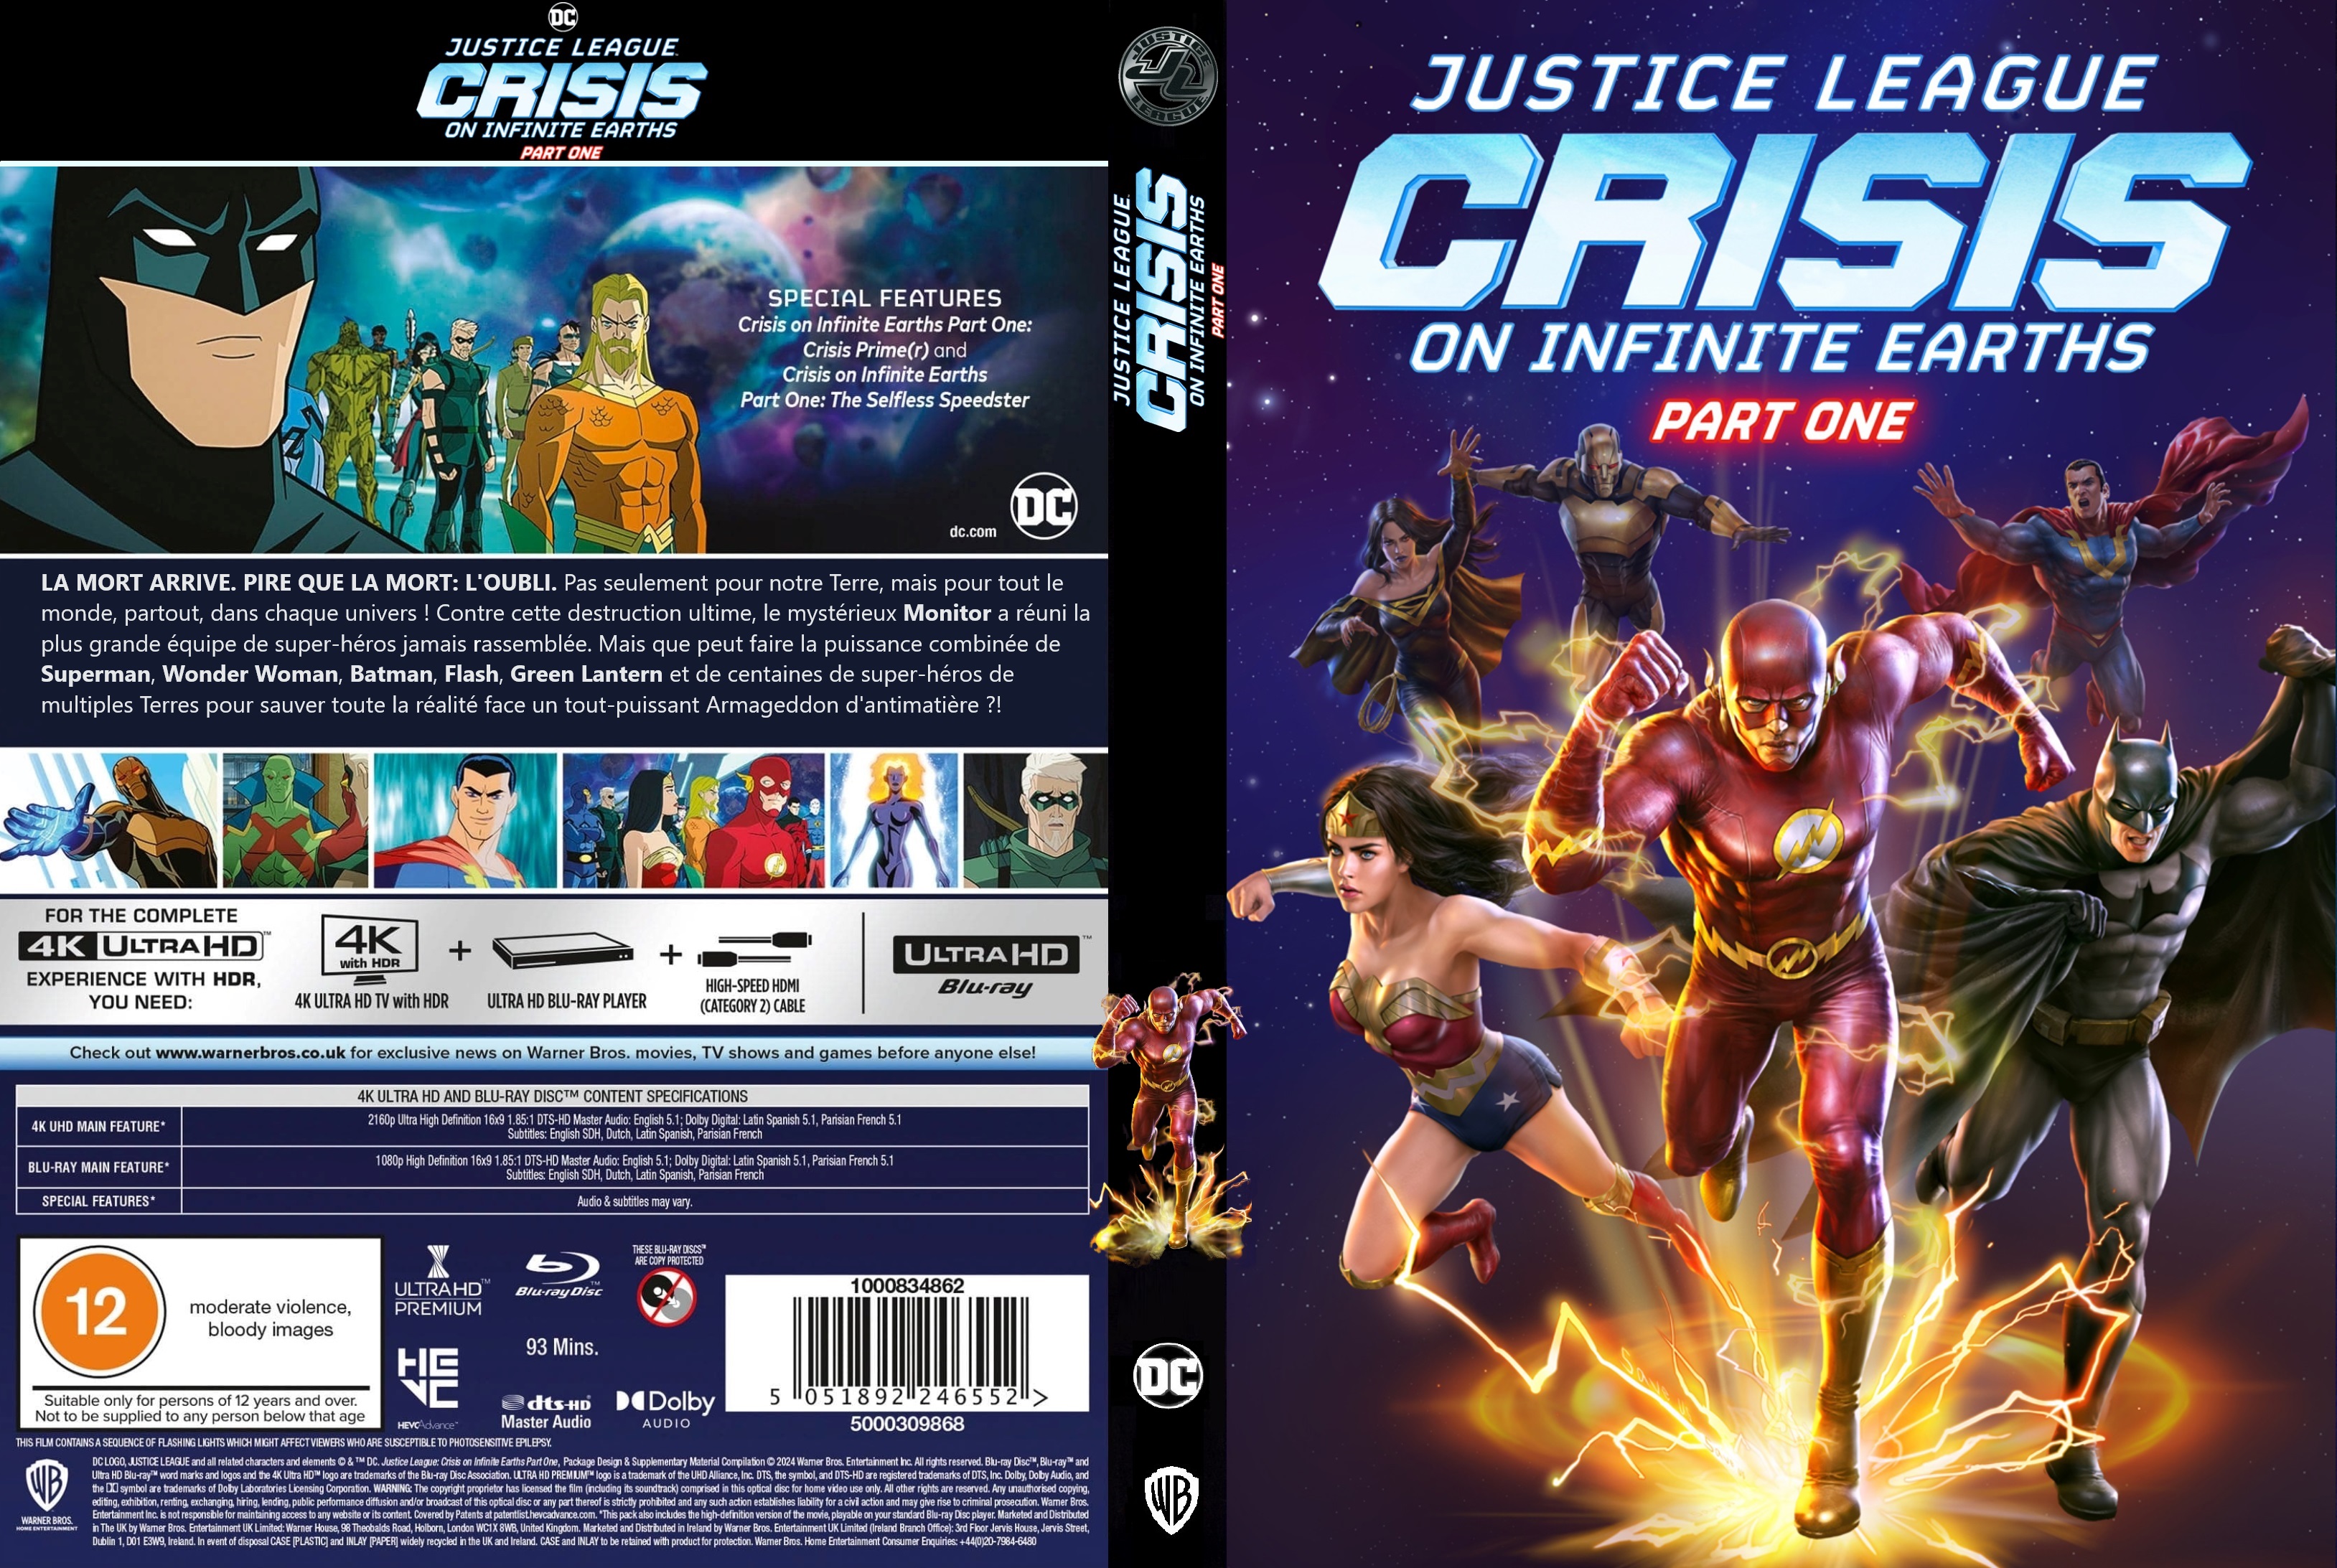 Jaquette DVD Justice League Crisis on infinite Earths part one custom